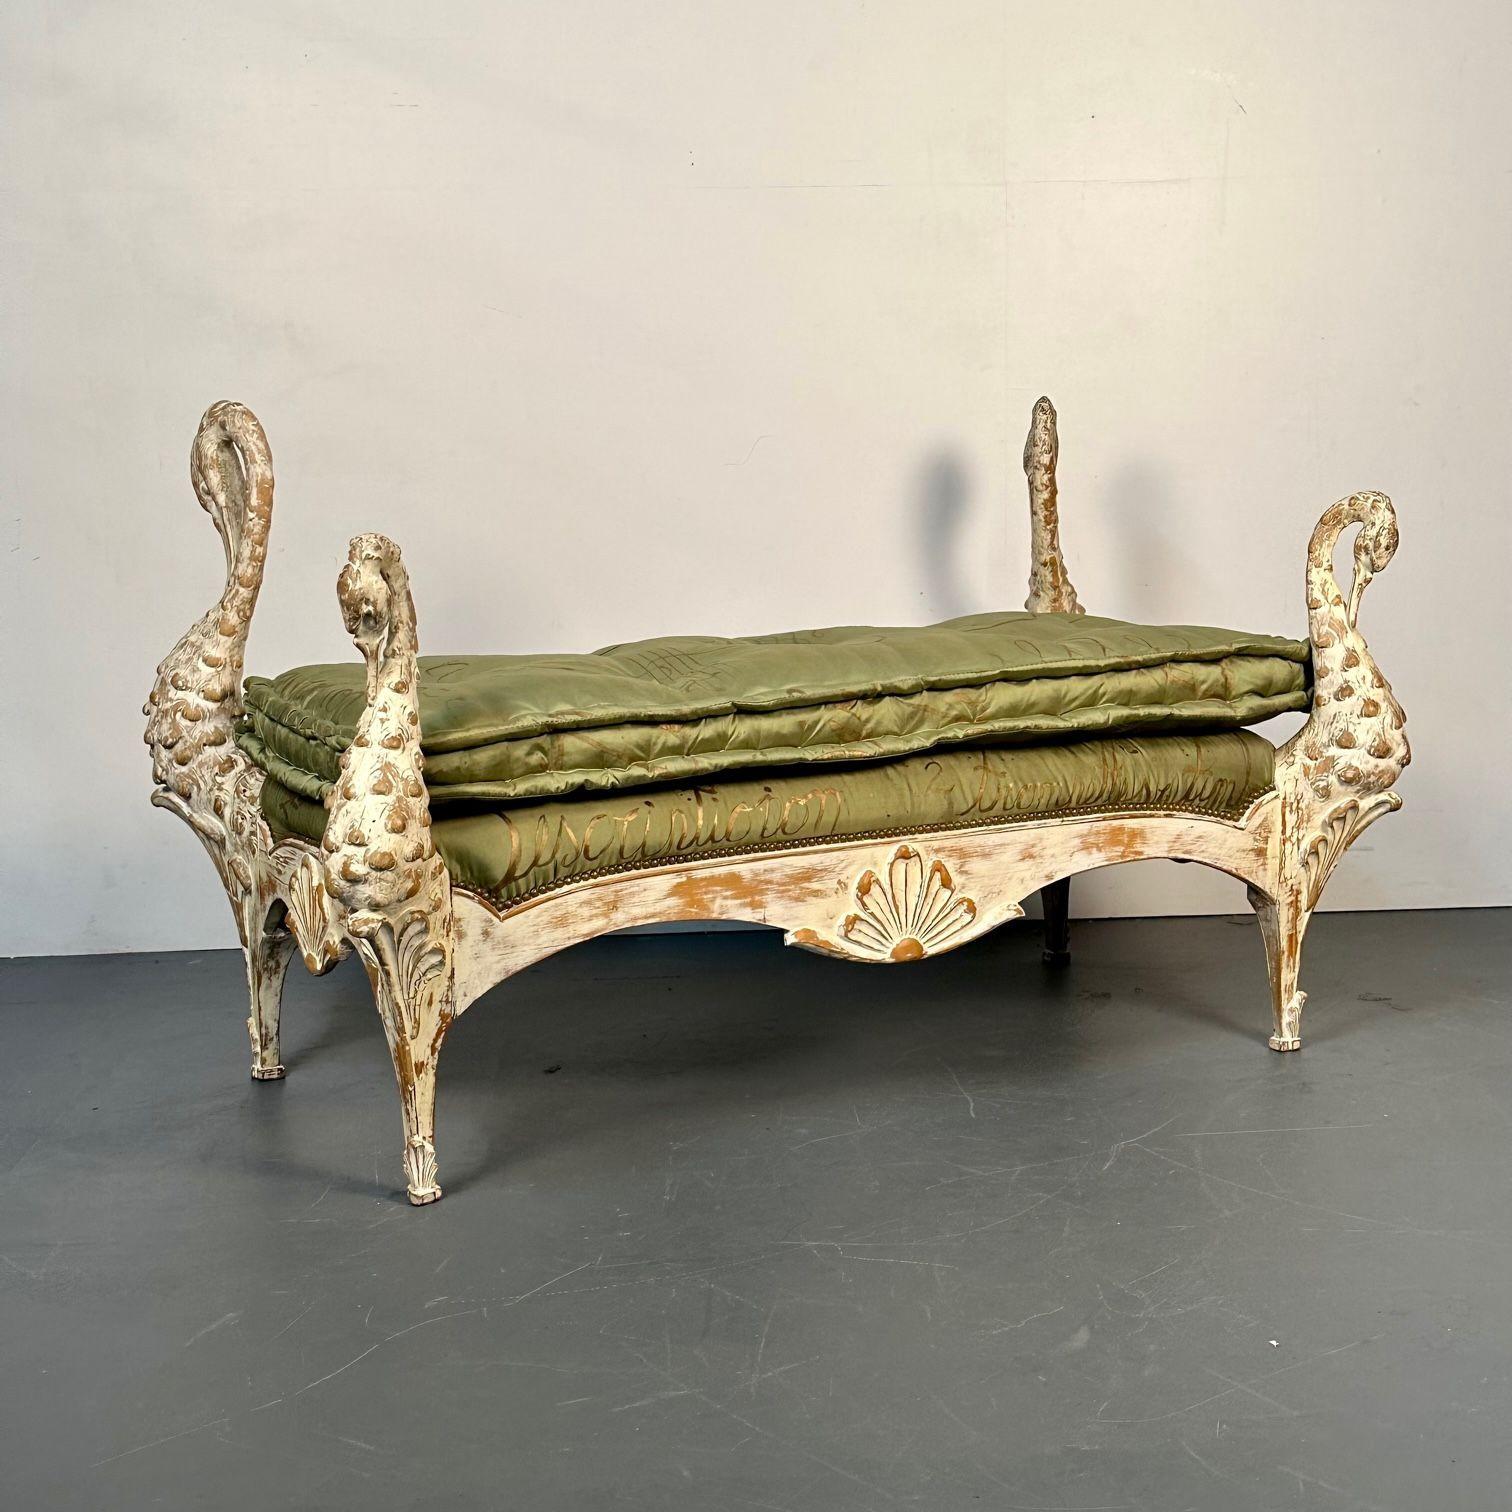 Maison Jansen Hollywood Regency Swan Bench / Daybed, Hand Carved, Distressed
 
Very unique French bench or daybed attributed to Maison Jansen having four intricately detailed hand carved full bodied swans. The whole having a shell carved Swedish